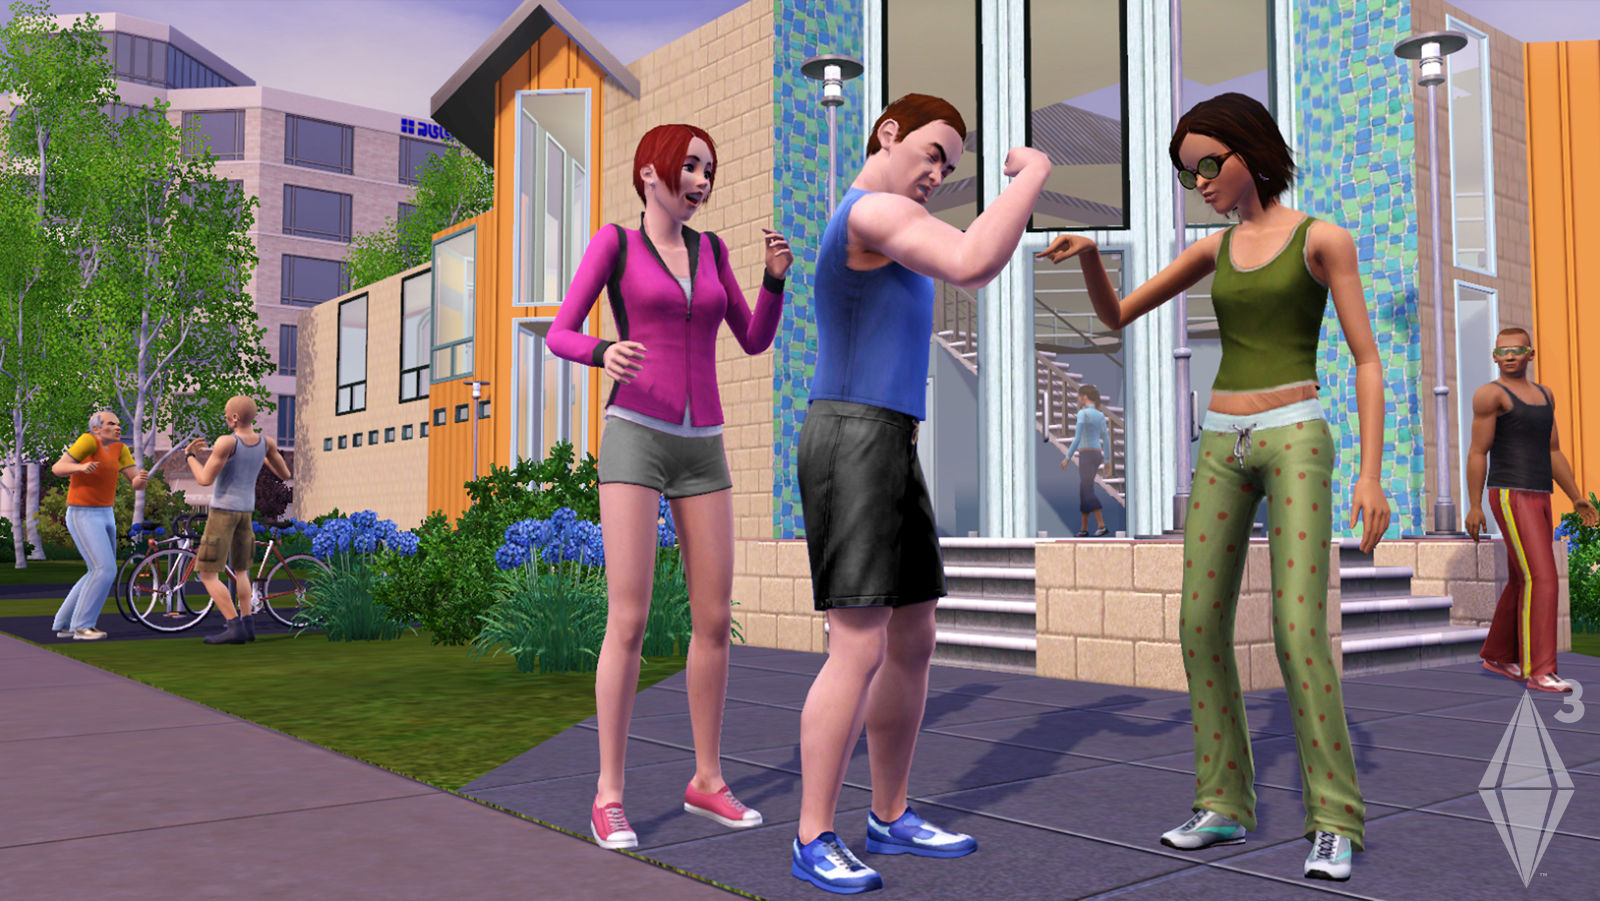 sims 3 review for mac